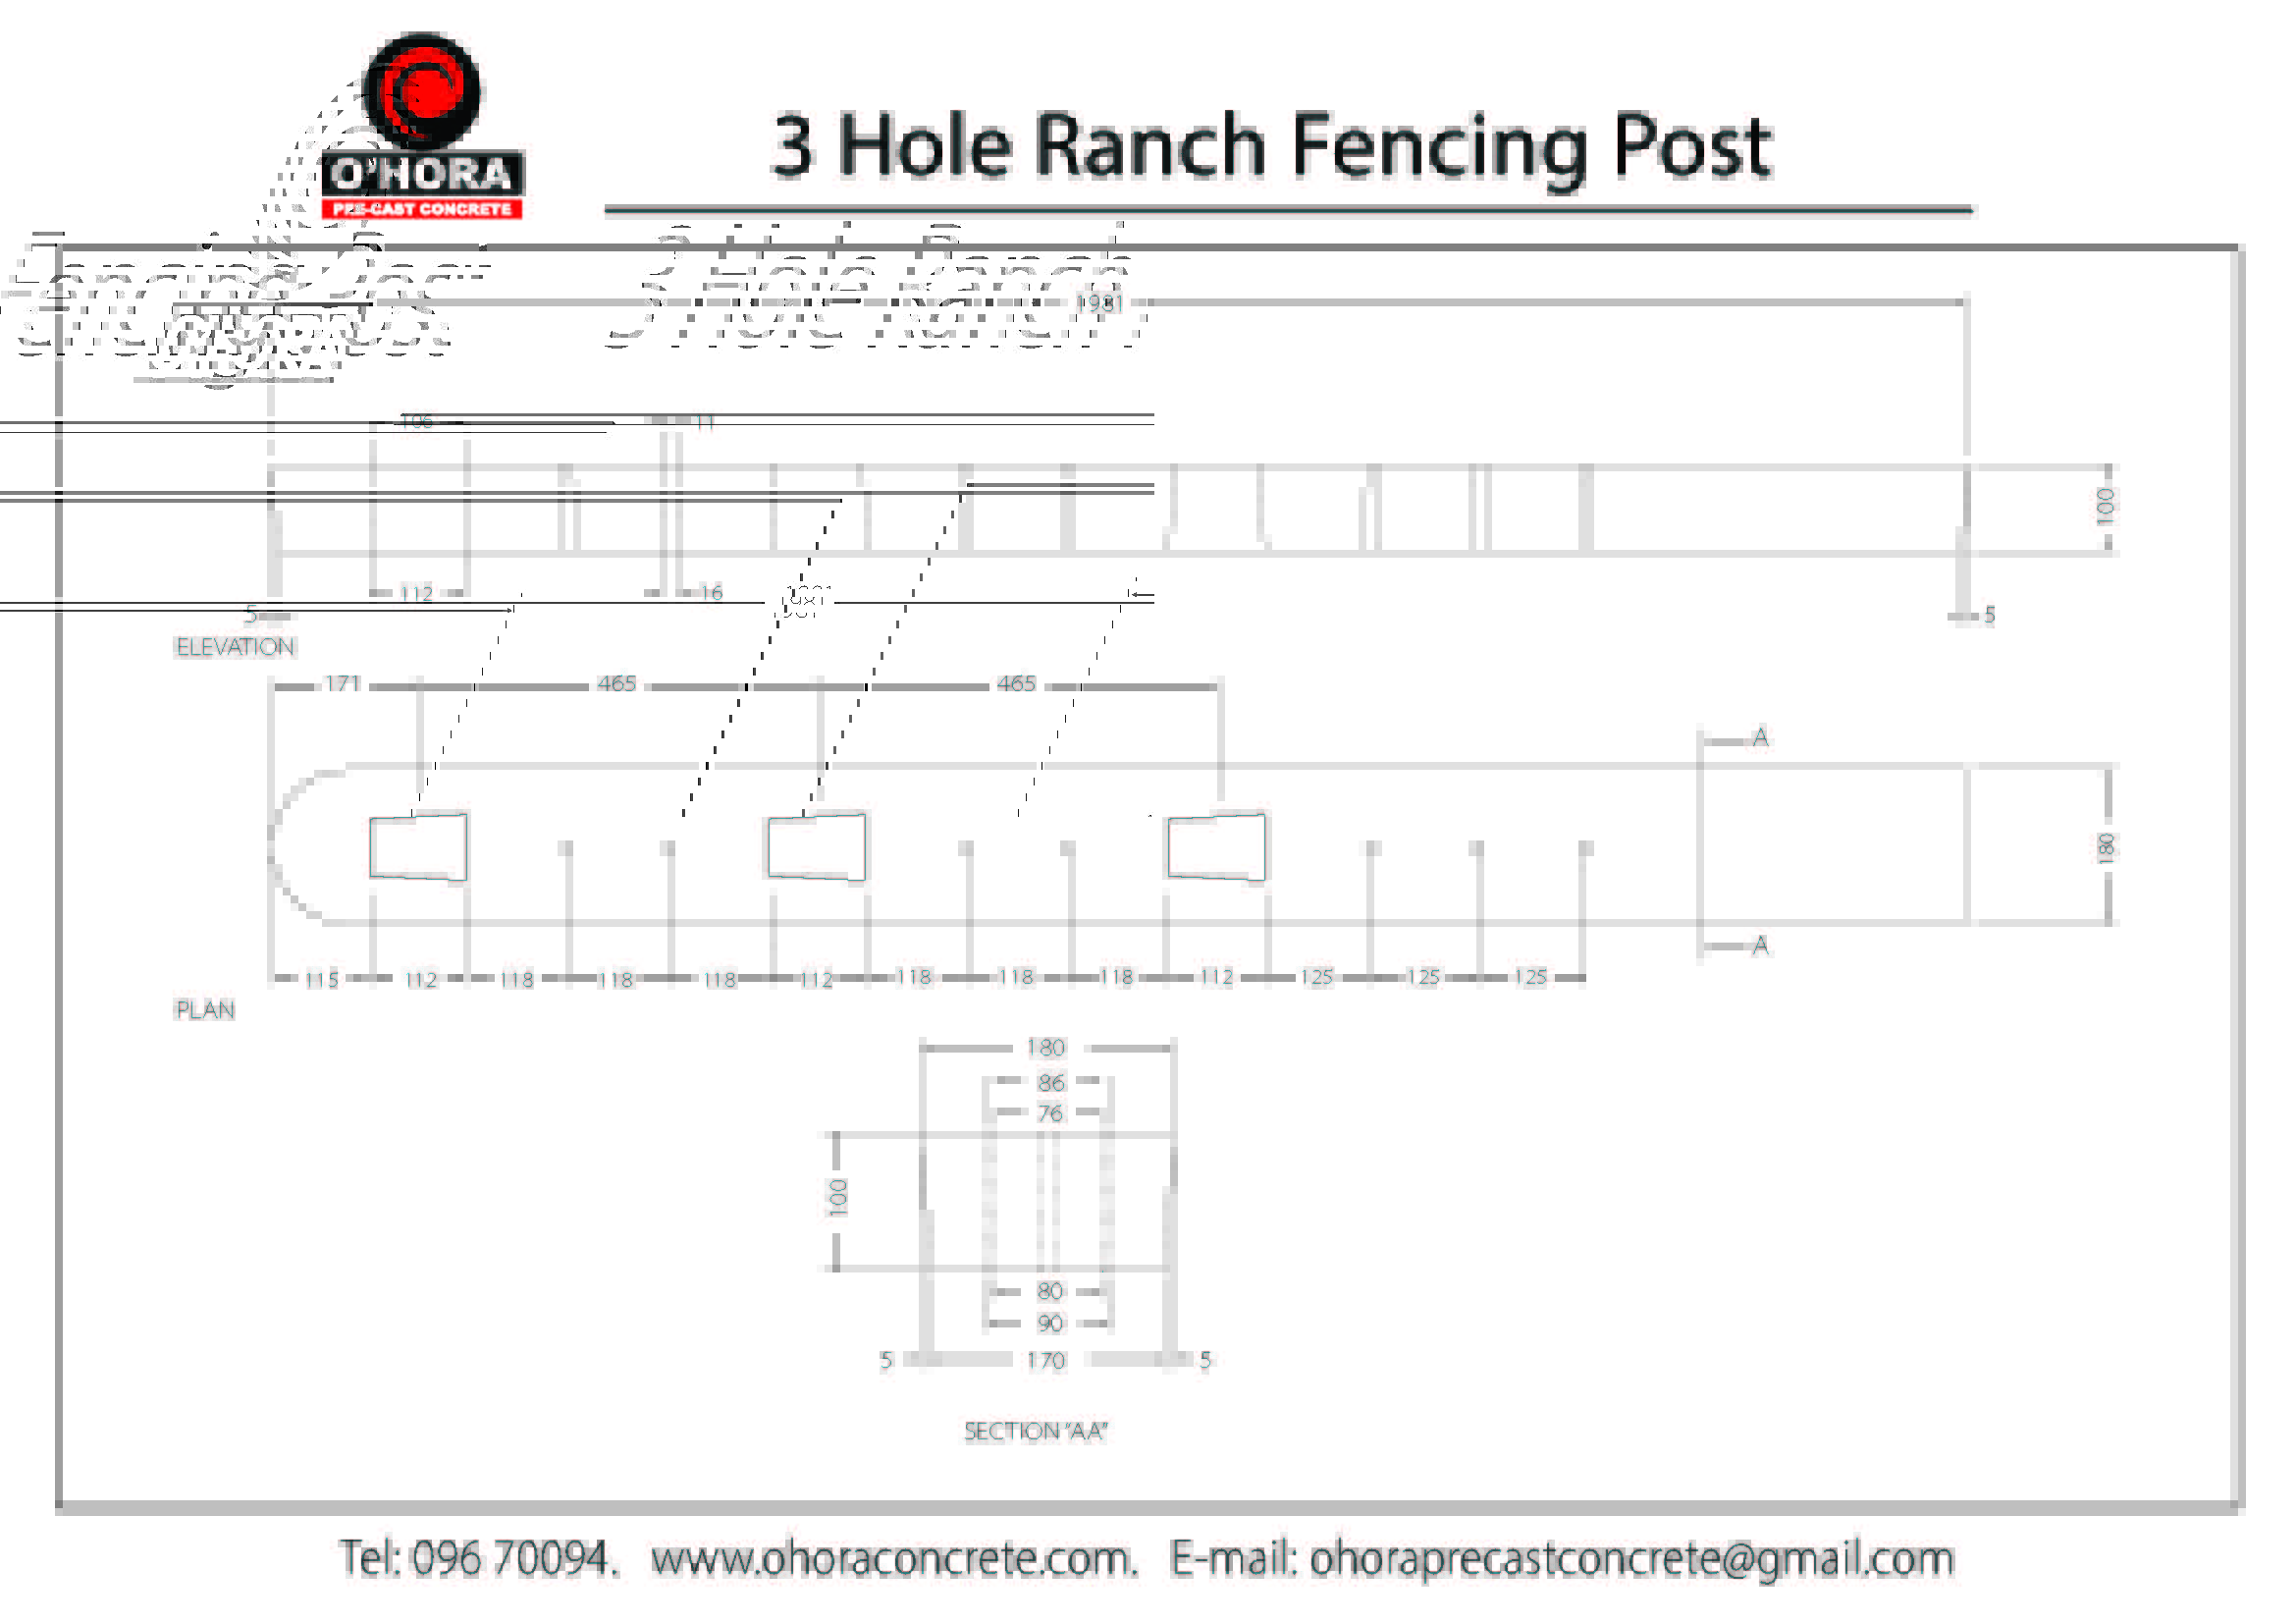 3 Hole Ranch Fencing Post